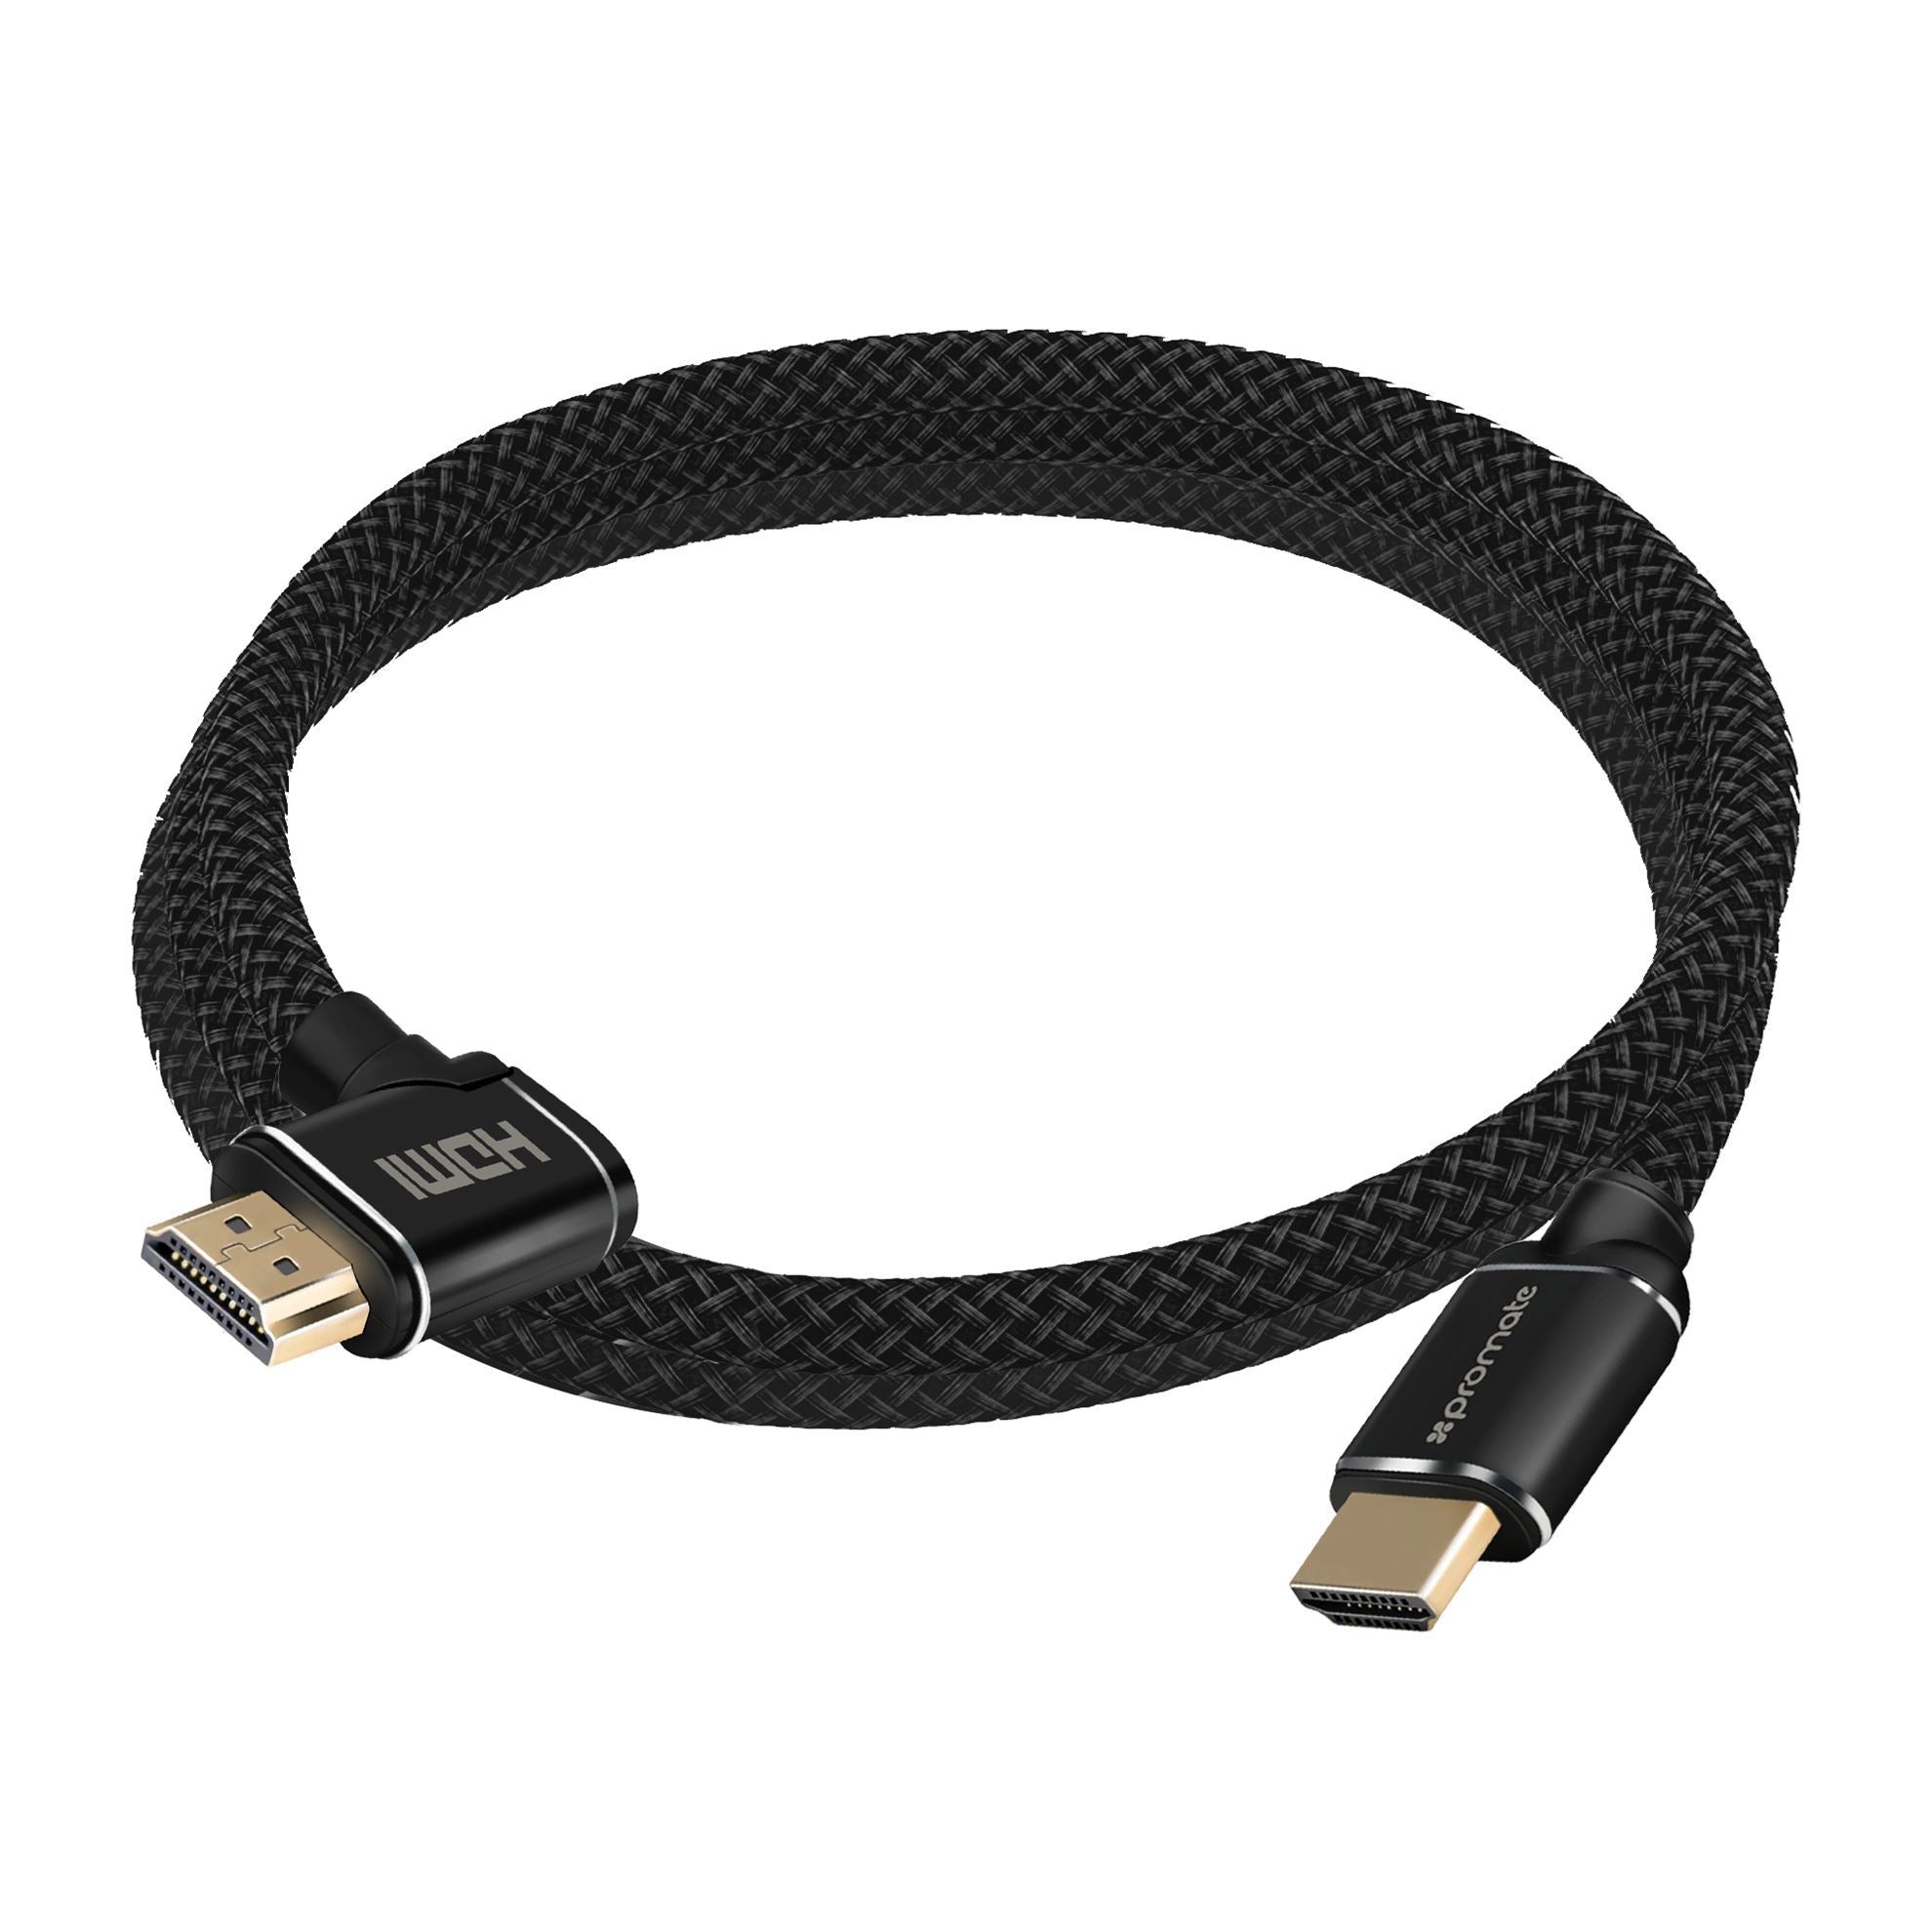 PROMATE_3m_4K_HDMI_right_angle_Cable._24K_Gold_plated._High-Speed_Ethernet._3D_support._Mesh_Braided_cable._Long_bend_lifespan._Max_Res:_4K@60Hz_(4096X2160)_July_Sale_-_20%_OFF 1681